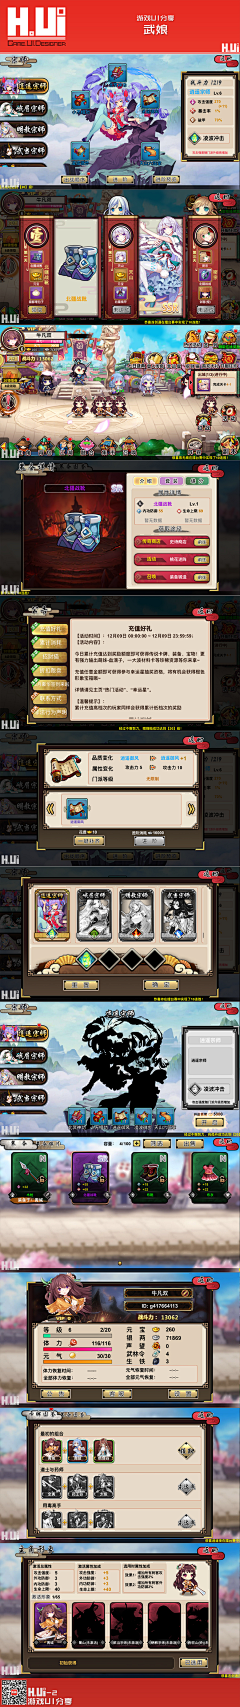 Jimmy_G采集到GAME